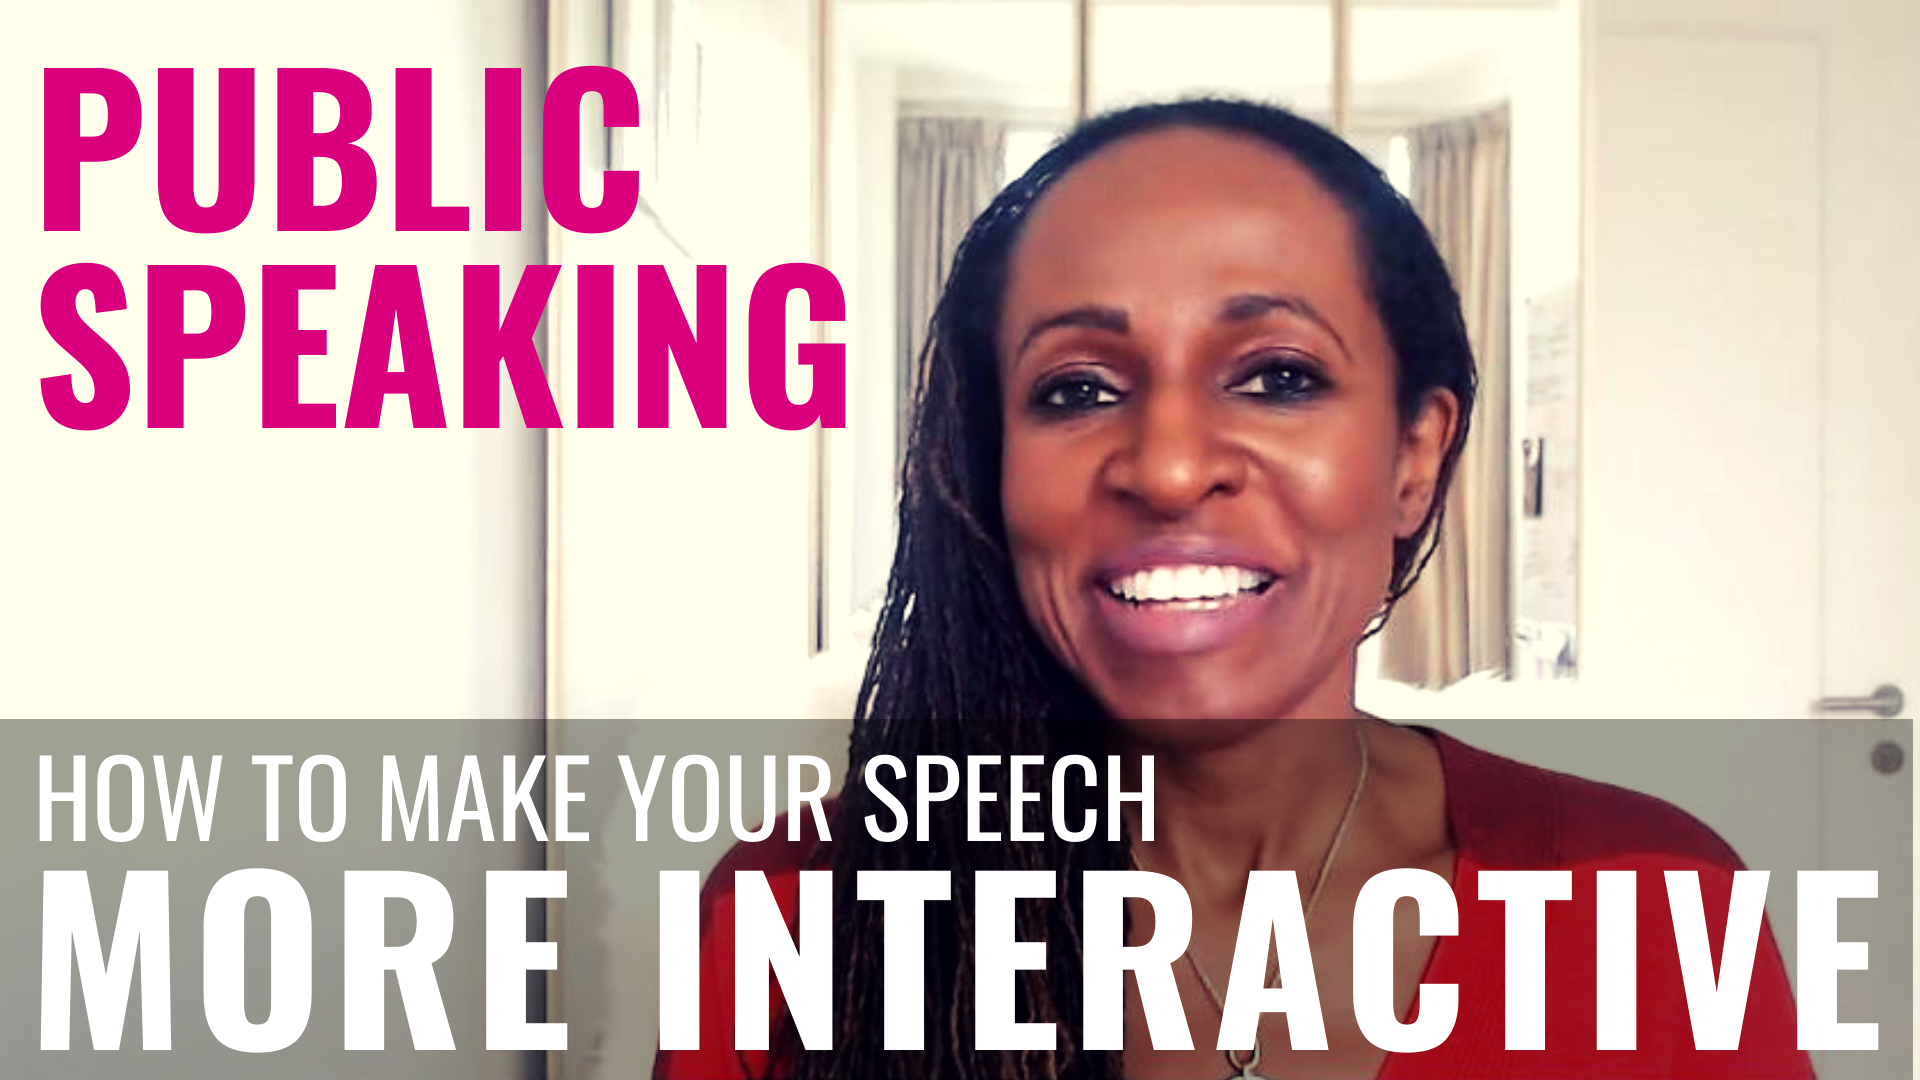 PUBLIC SPEAKING - How to make your speech MORE INTERACTIVE